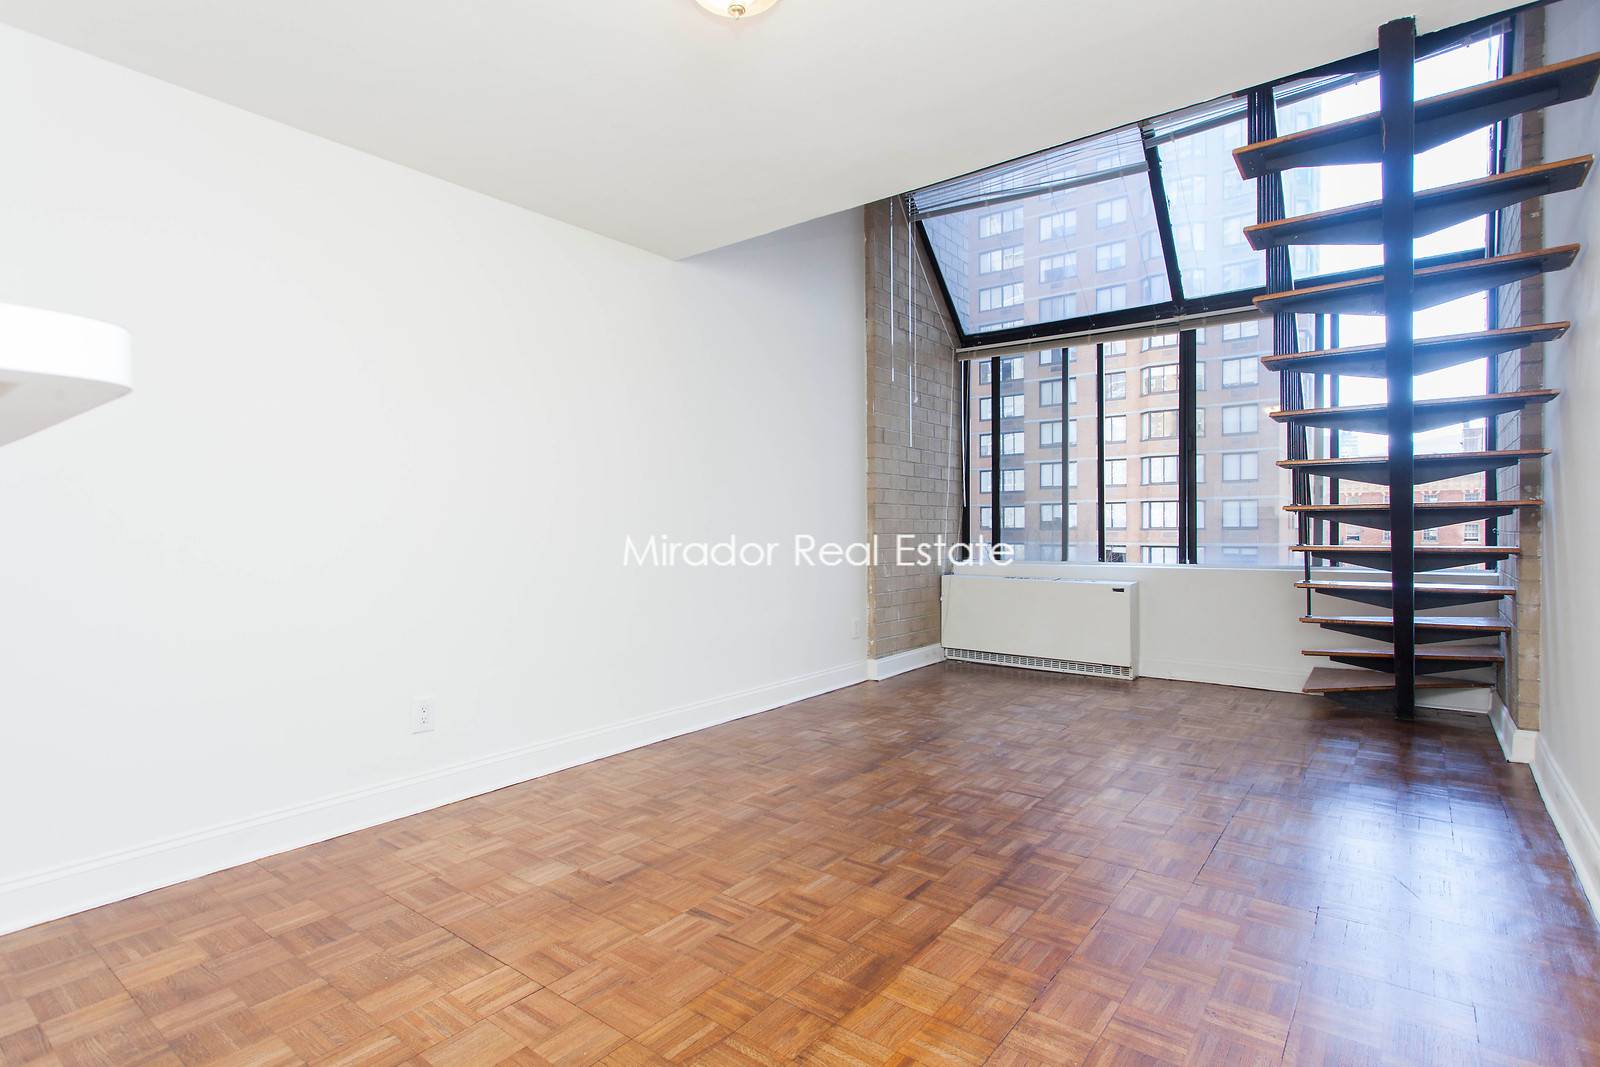 The apartment is a beautiful one bedroom duplex loft in a centrally located 24 hour doorman building in Murray Hill.